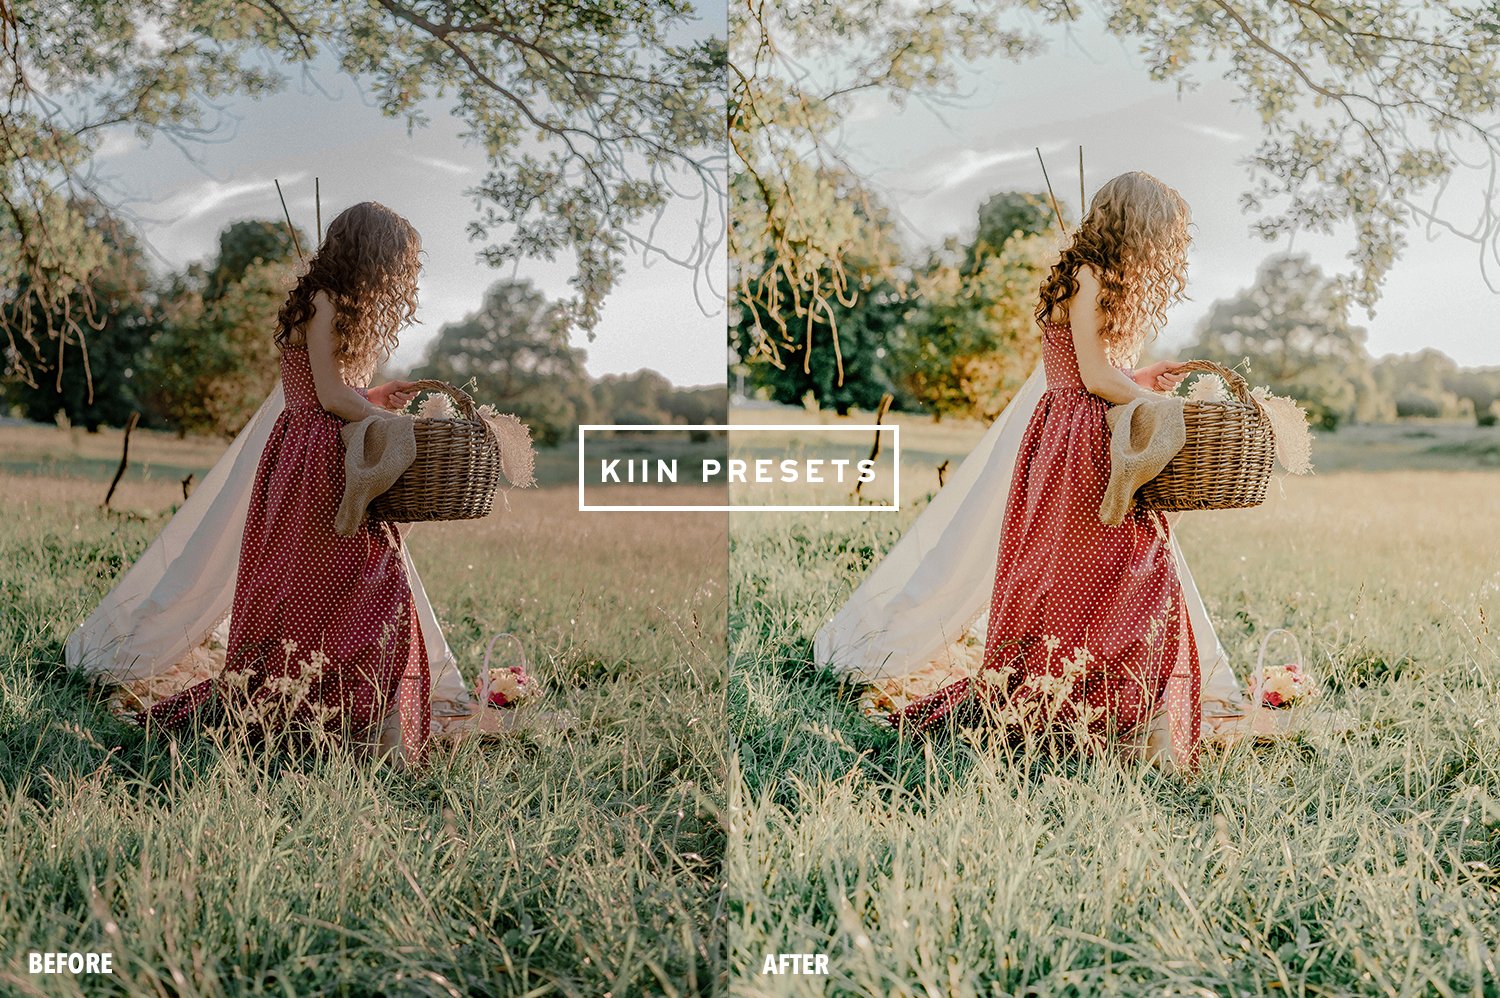 08kiin lightroom presets outdoor presets outdoor filter farm presets blogger filter cottagecore presets country aesthetic presets family presets 158